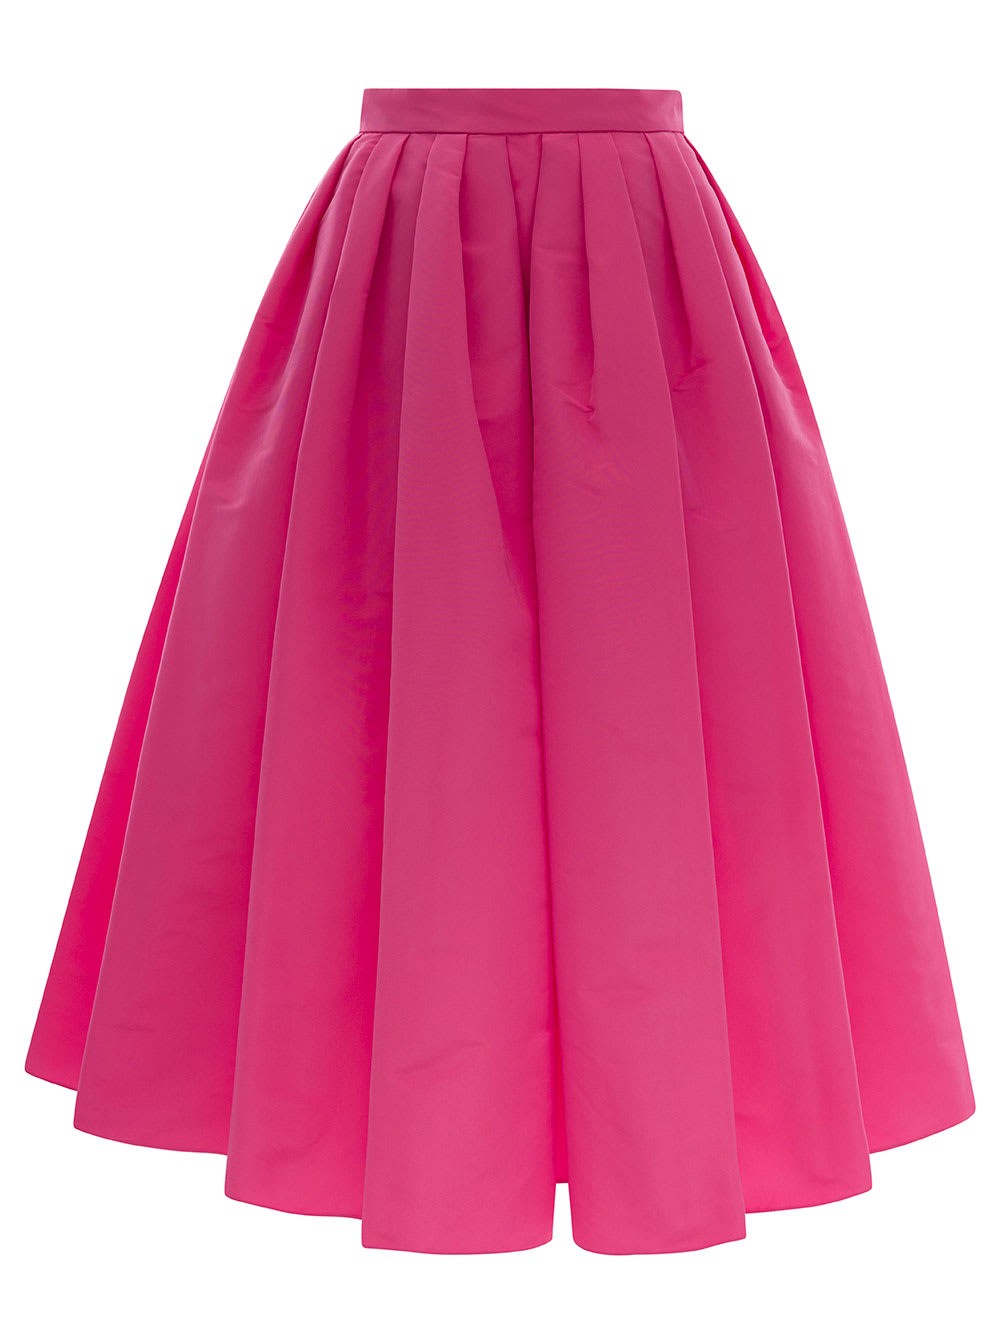 ALEXANDER MCQUEEN MIDI PINK PLEATED SKIRT IN POLYESTER WOMAN